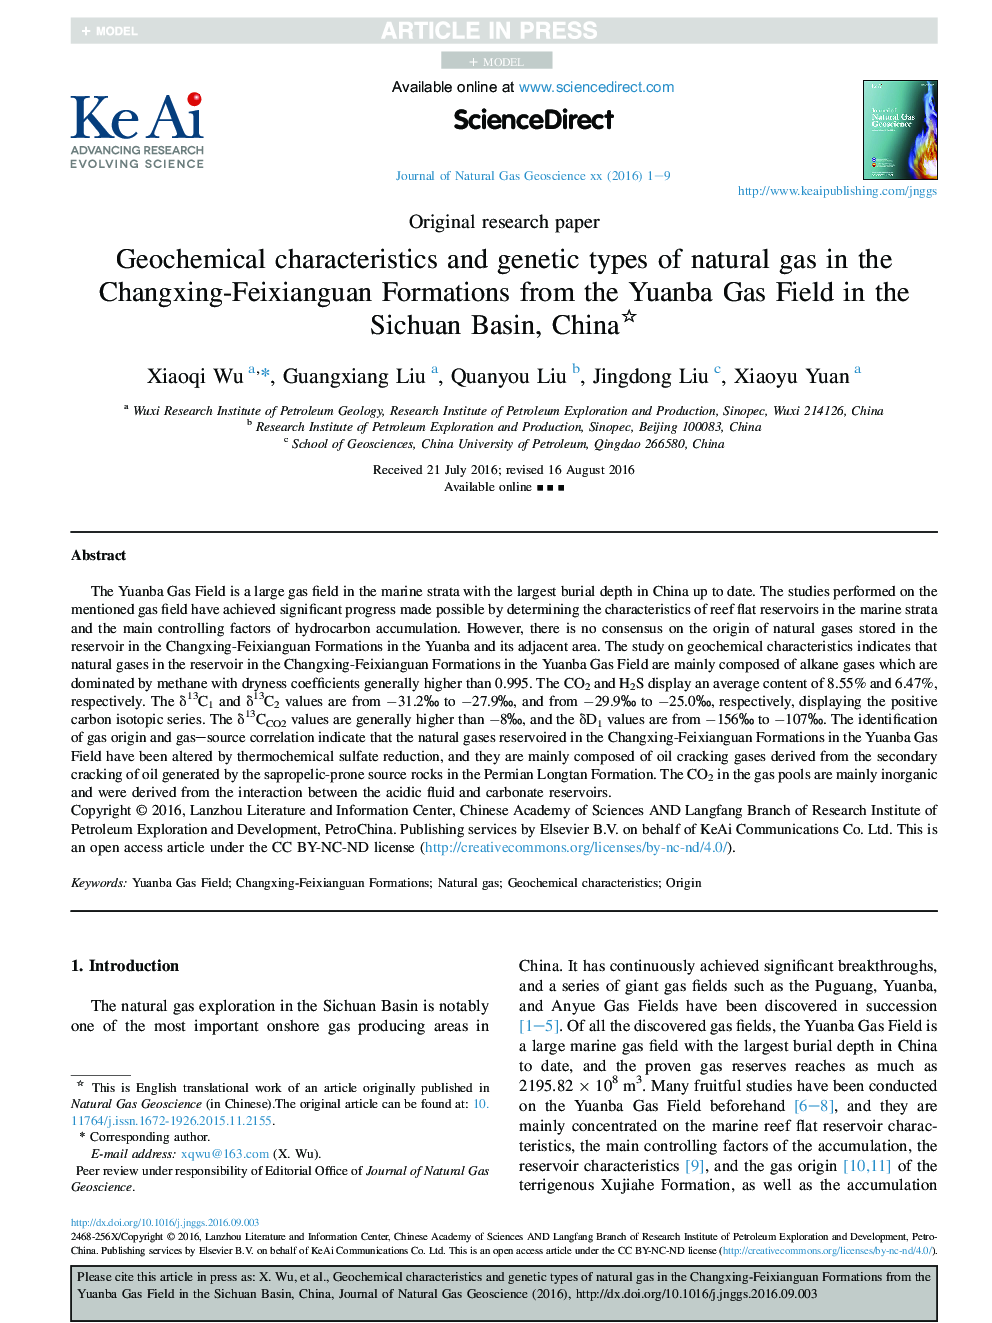 Geochemical characteristics and genetic types of natural gas in the Changxing-Feixianguan Formations from the Yuanba Gas Field in the Sichuan Basin, China